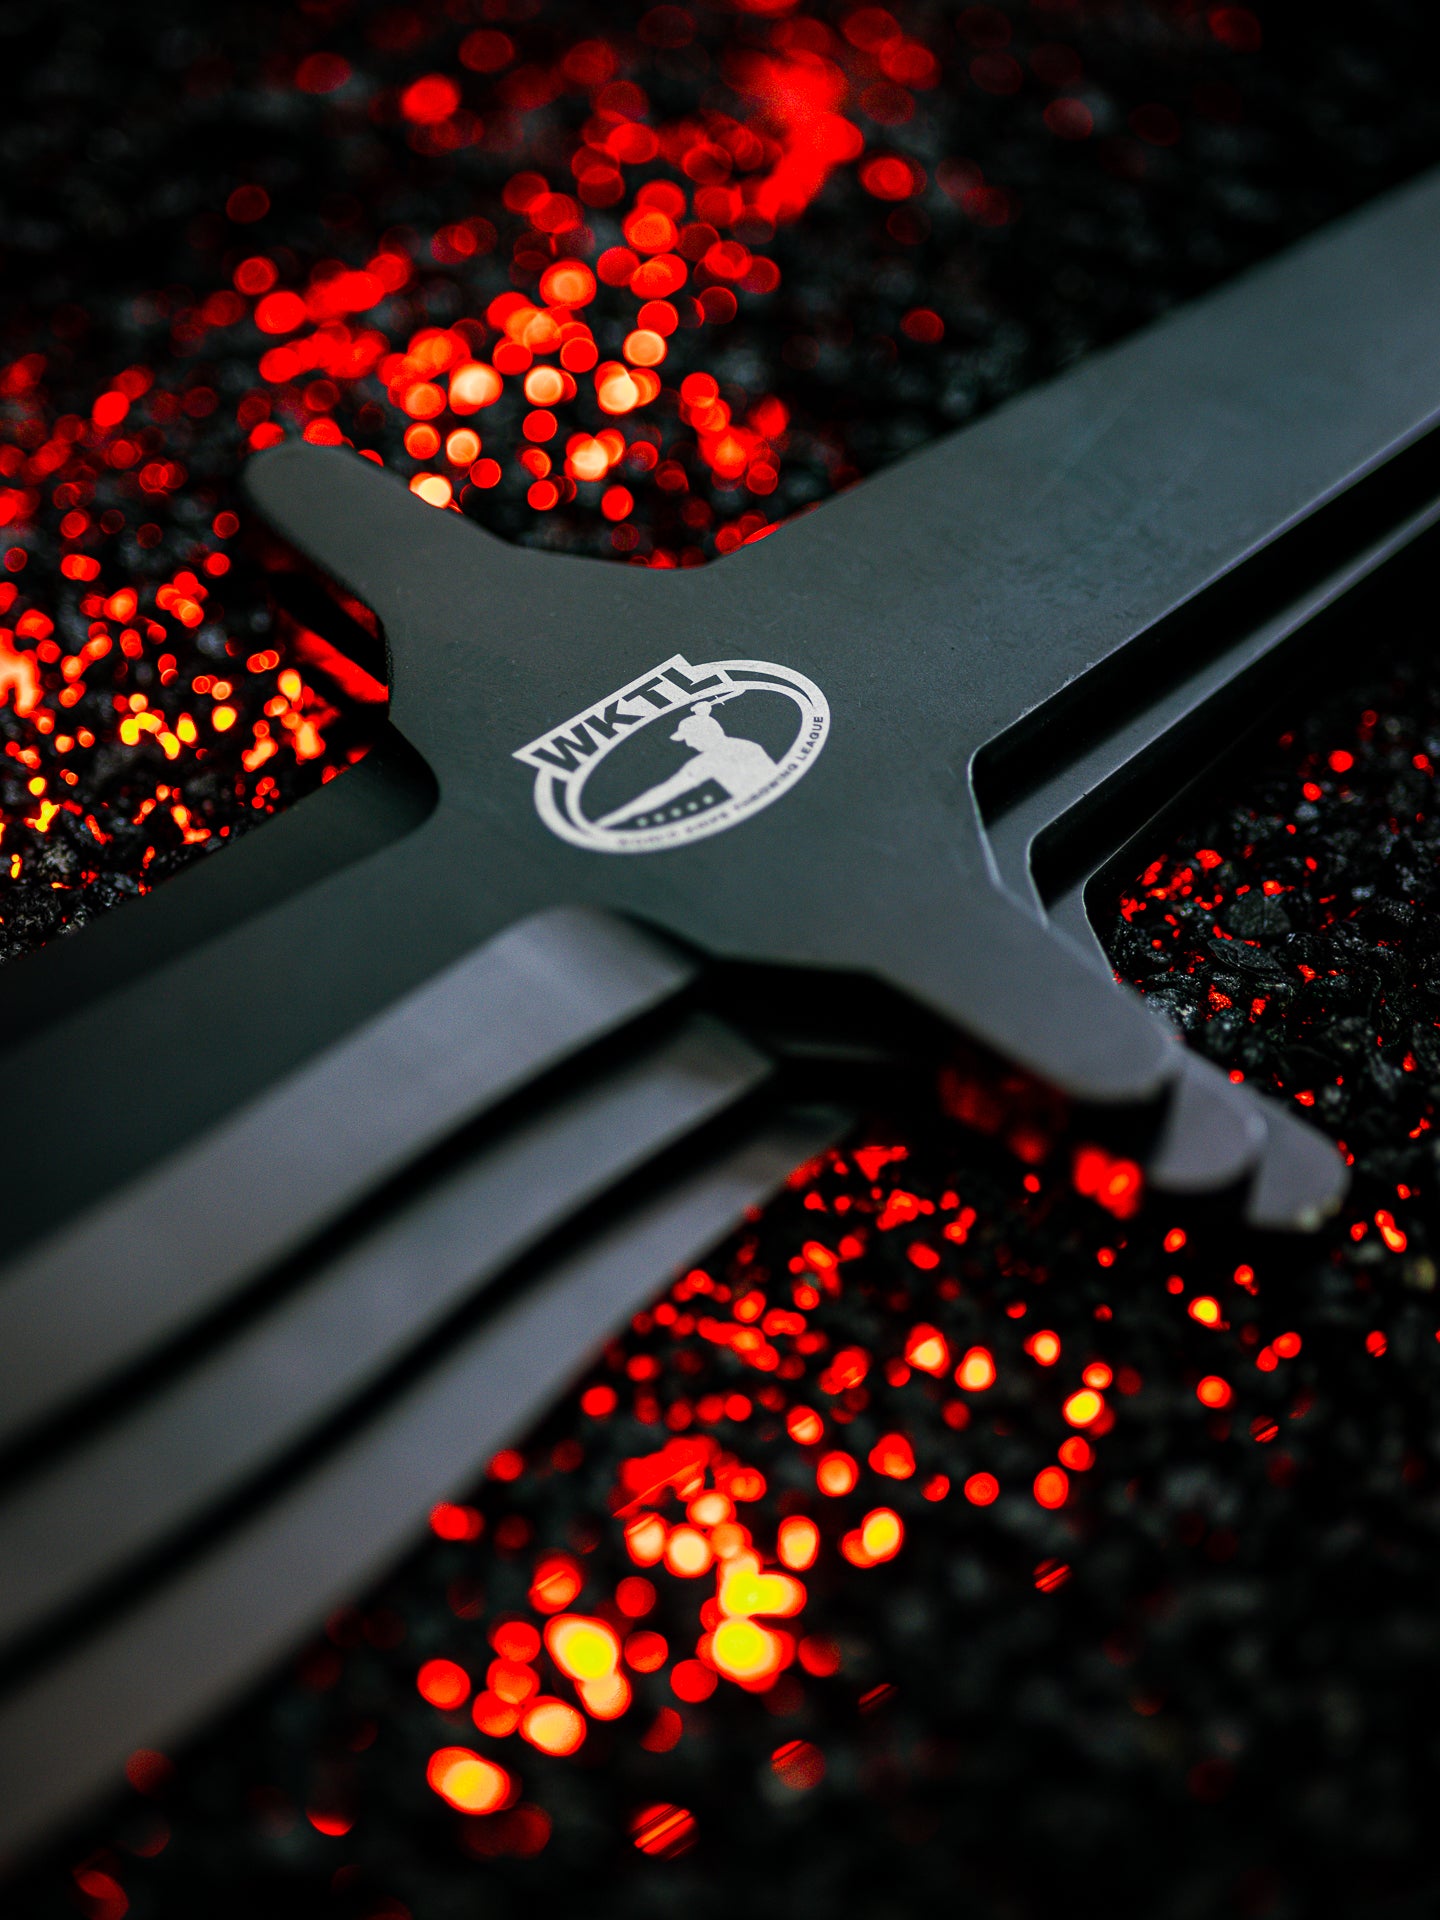 World Knife Throwing League (WKTL) Certified Competition Throwing Knife, The Phoenix Guards